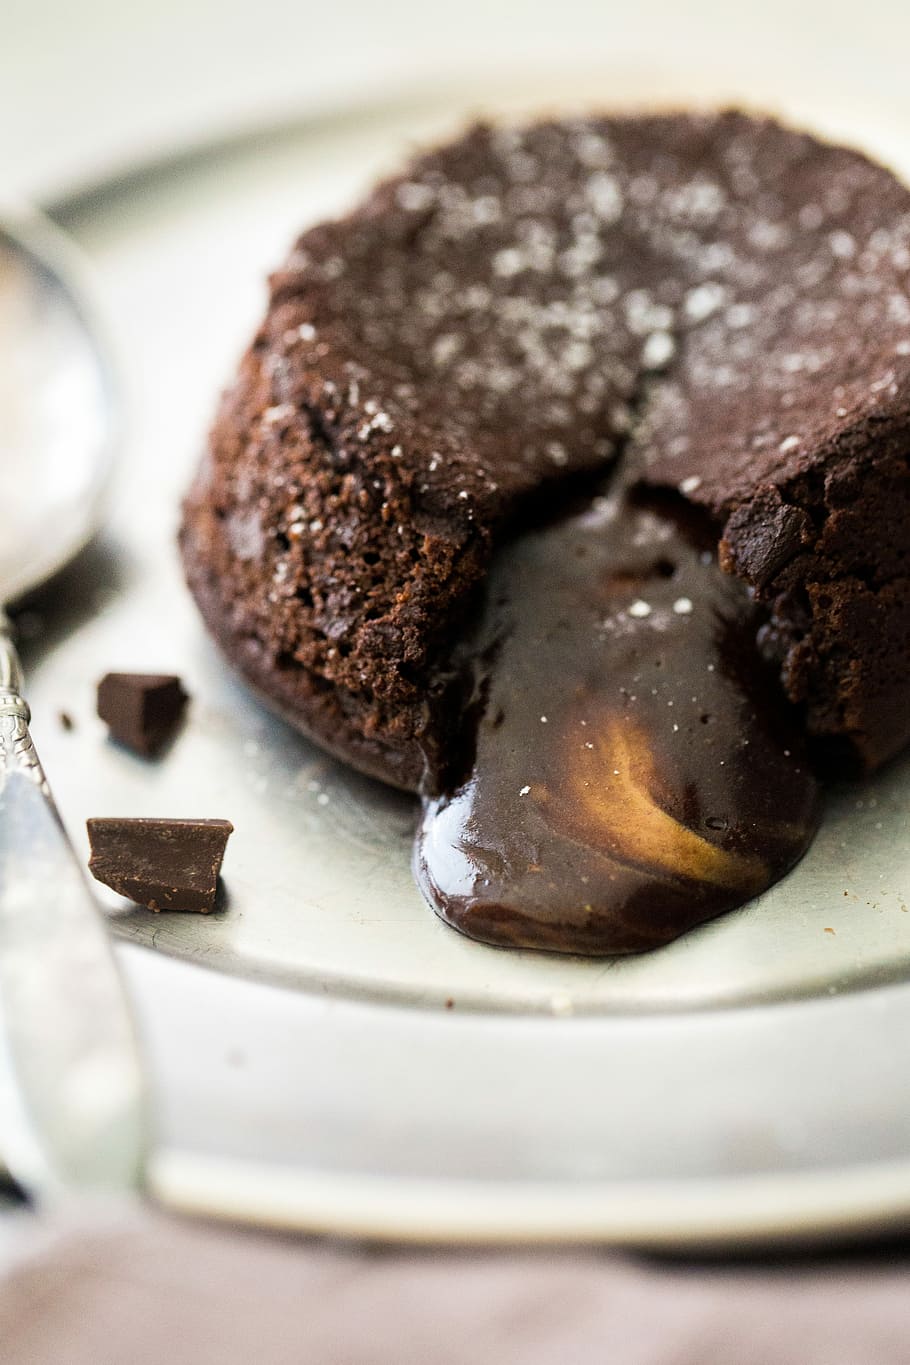 round baked cake on plate, chocolate lava cake served on plate during daytime, HD wallpaper